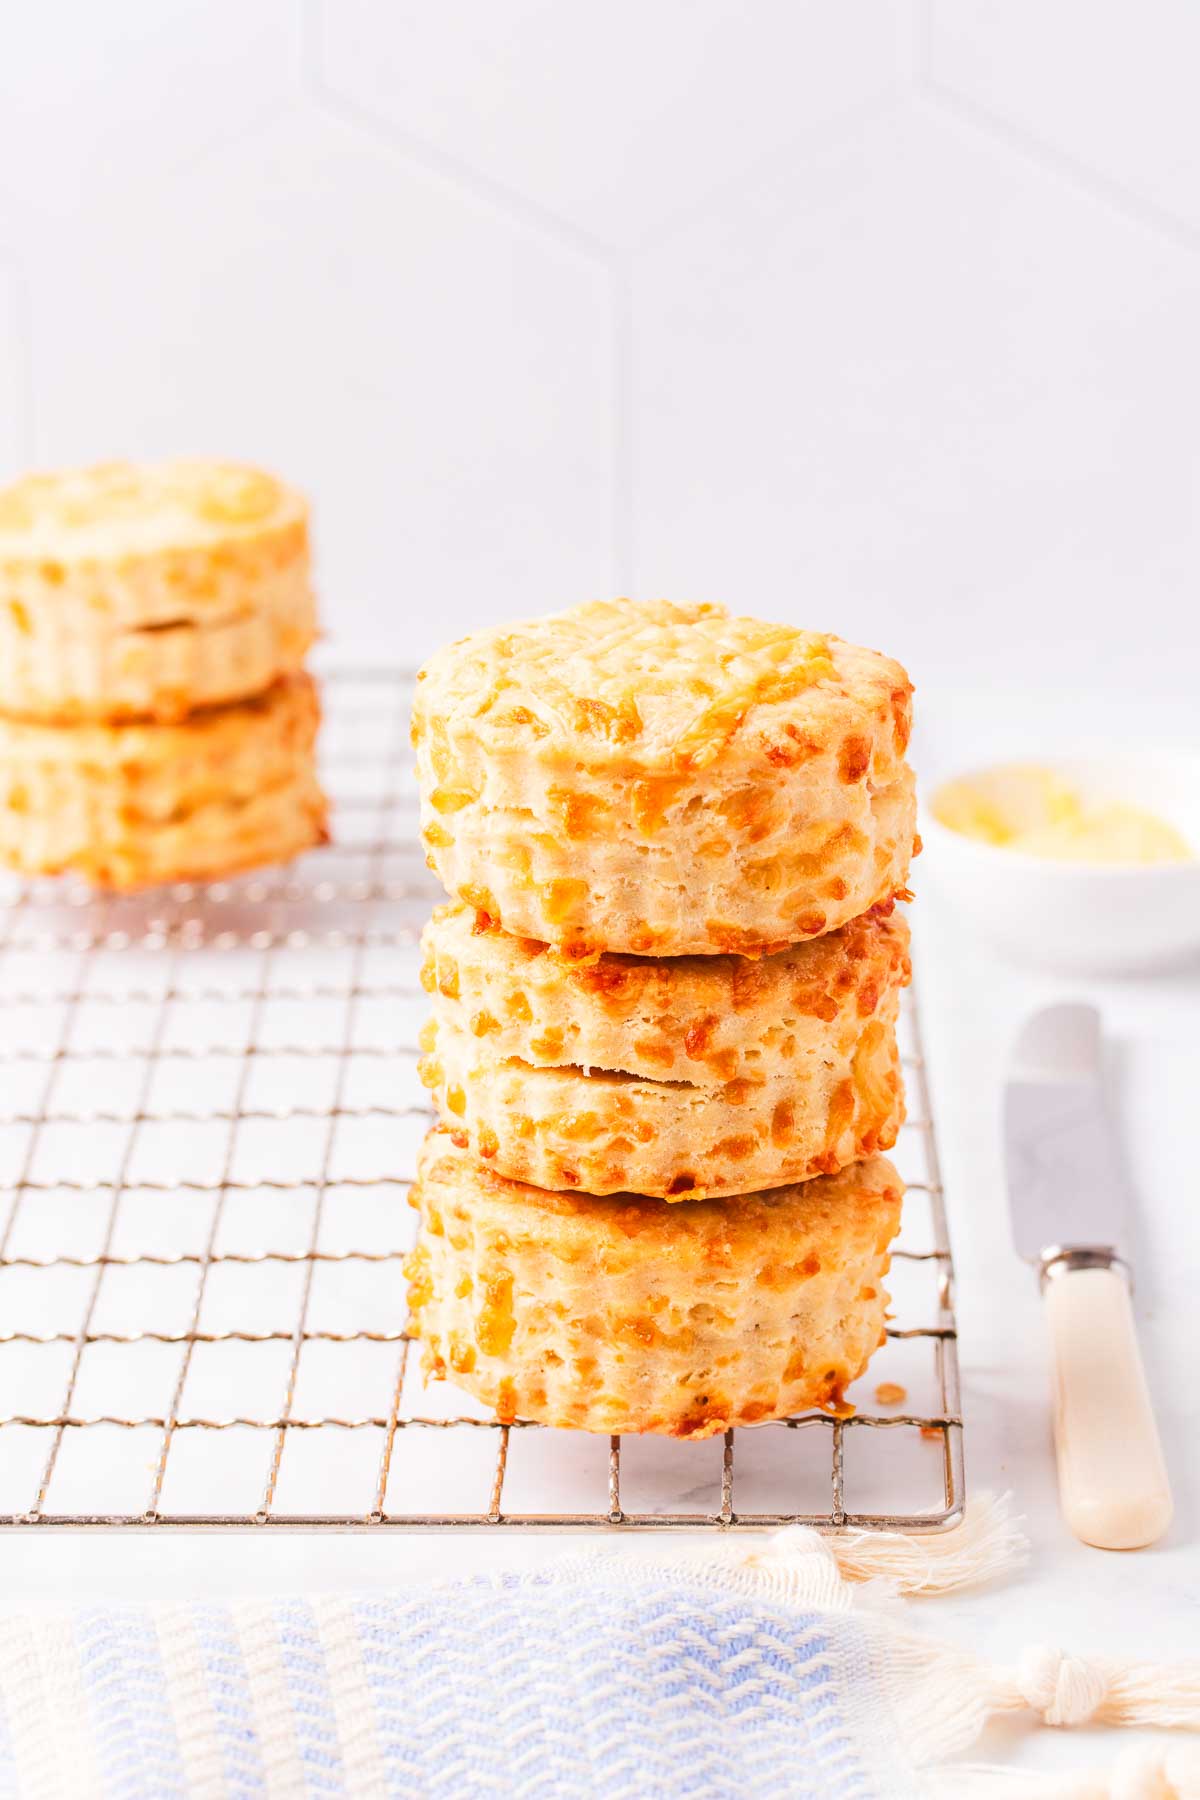 A stack of three cheese scones on a wire rack against a grey tiled background, with a small dish of butter and a bone handled knife.